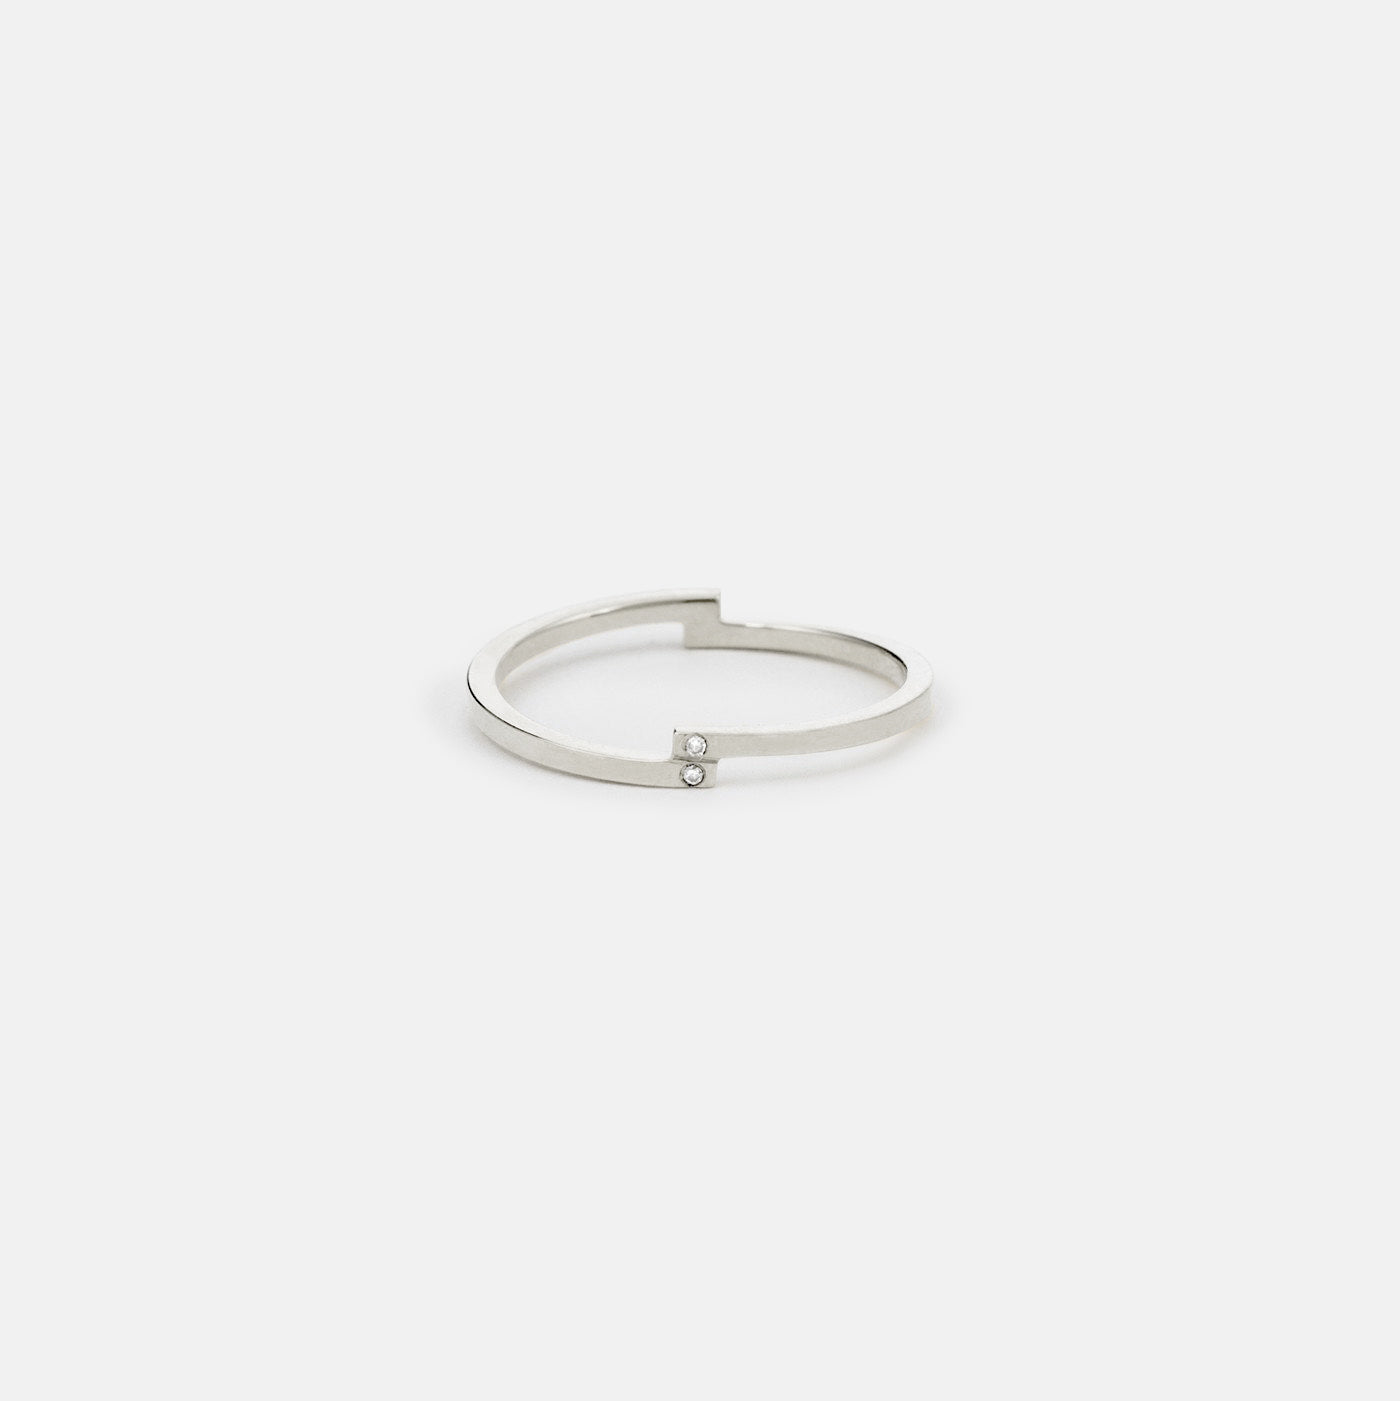 Pili Delicate Ring in Sterling Silver set with White and Black Diamonds By SHW Fine Jewelry New York City